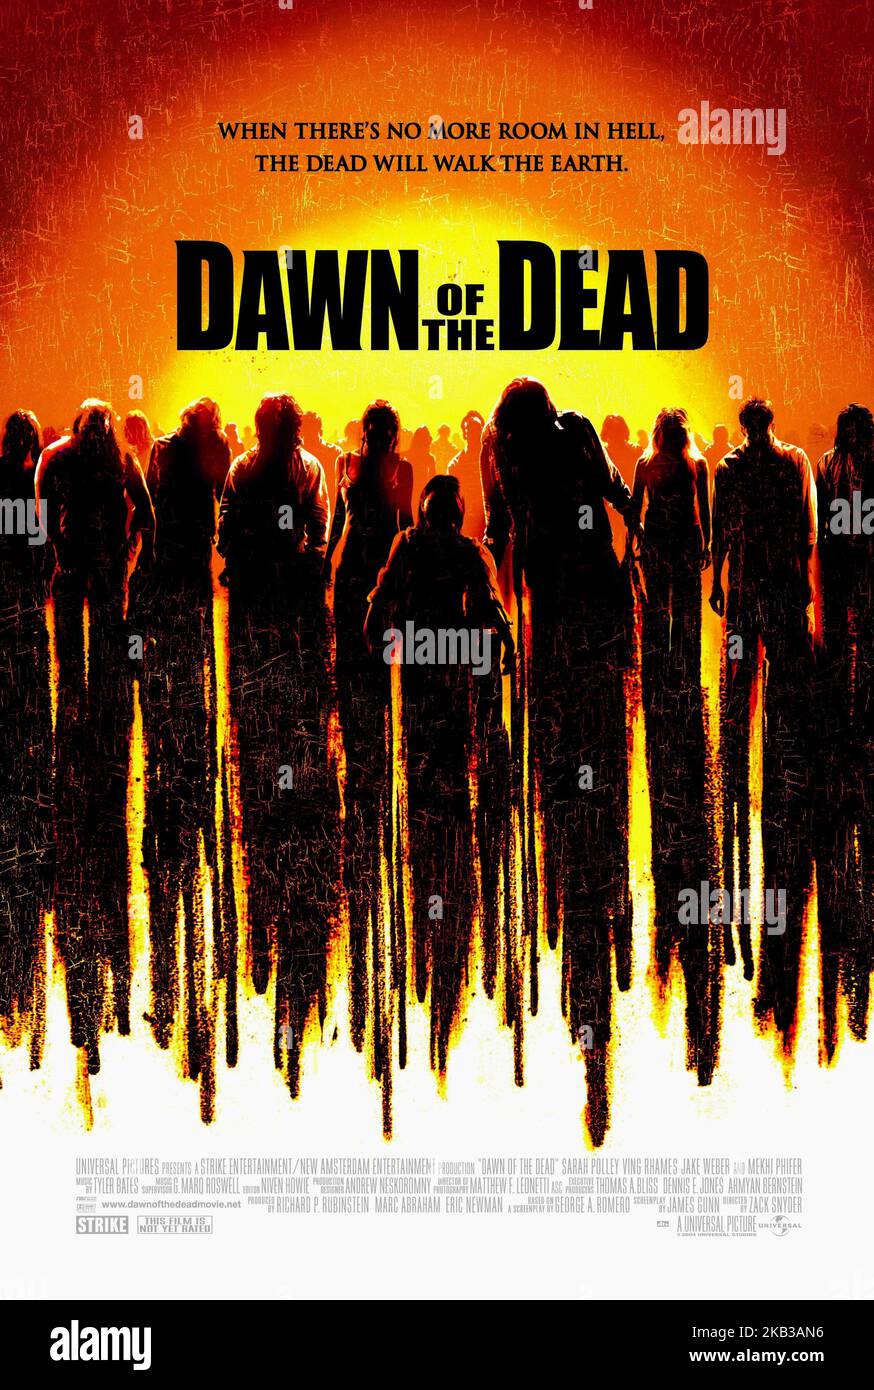 DAWN OF THE DEAD, FILM POSTER, 2004 Stock Photo